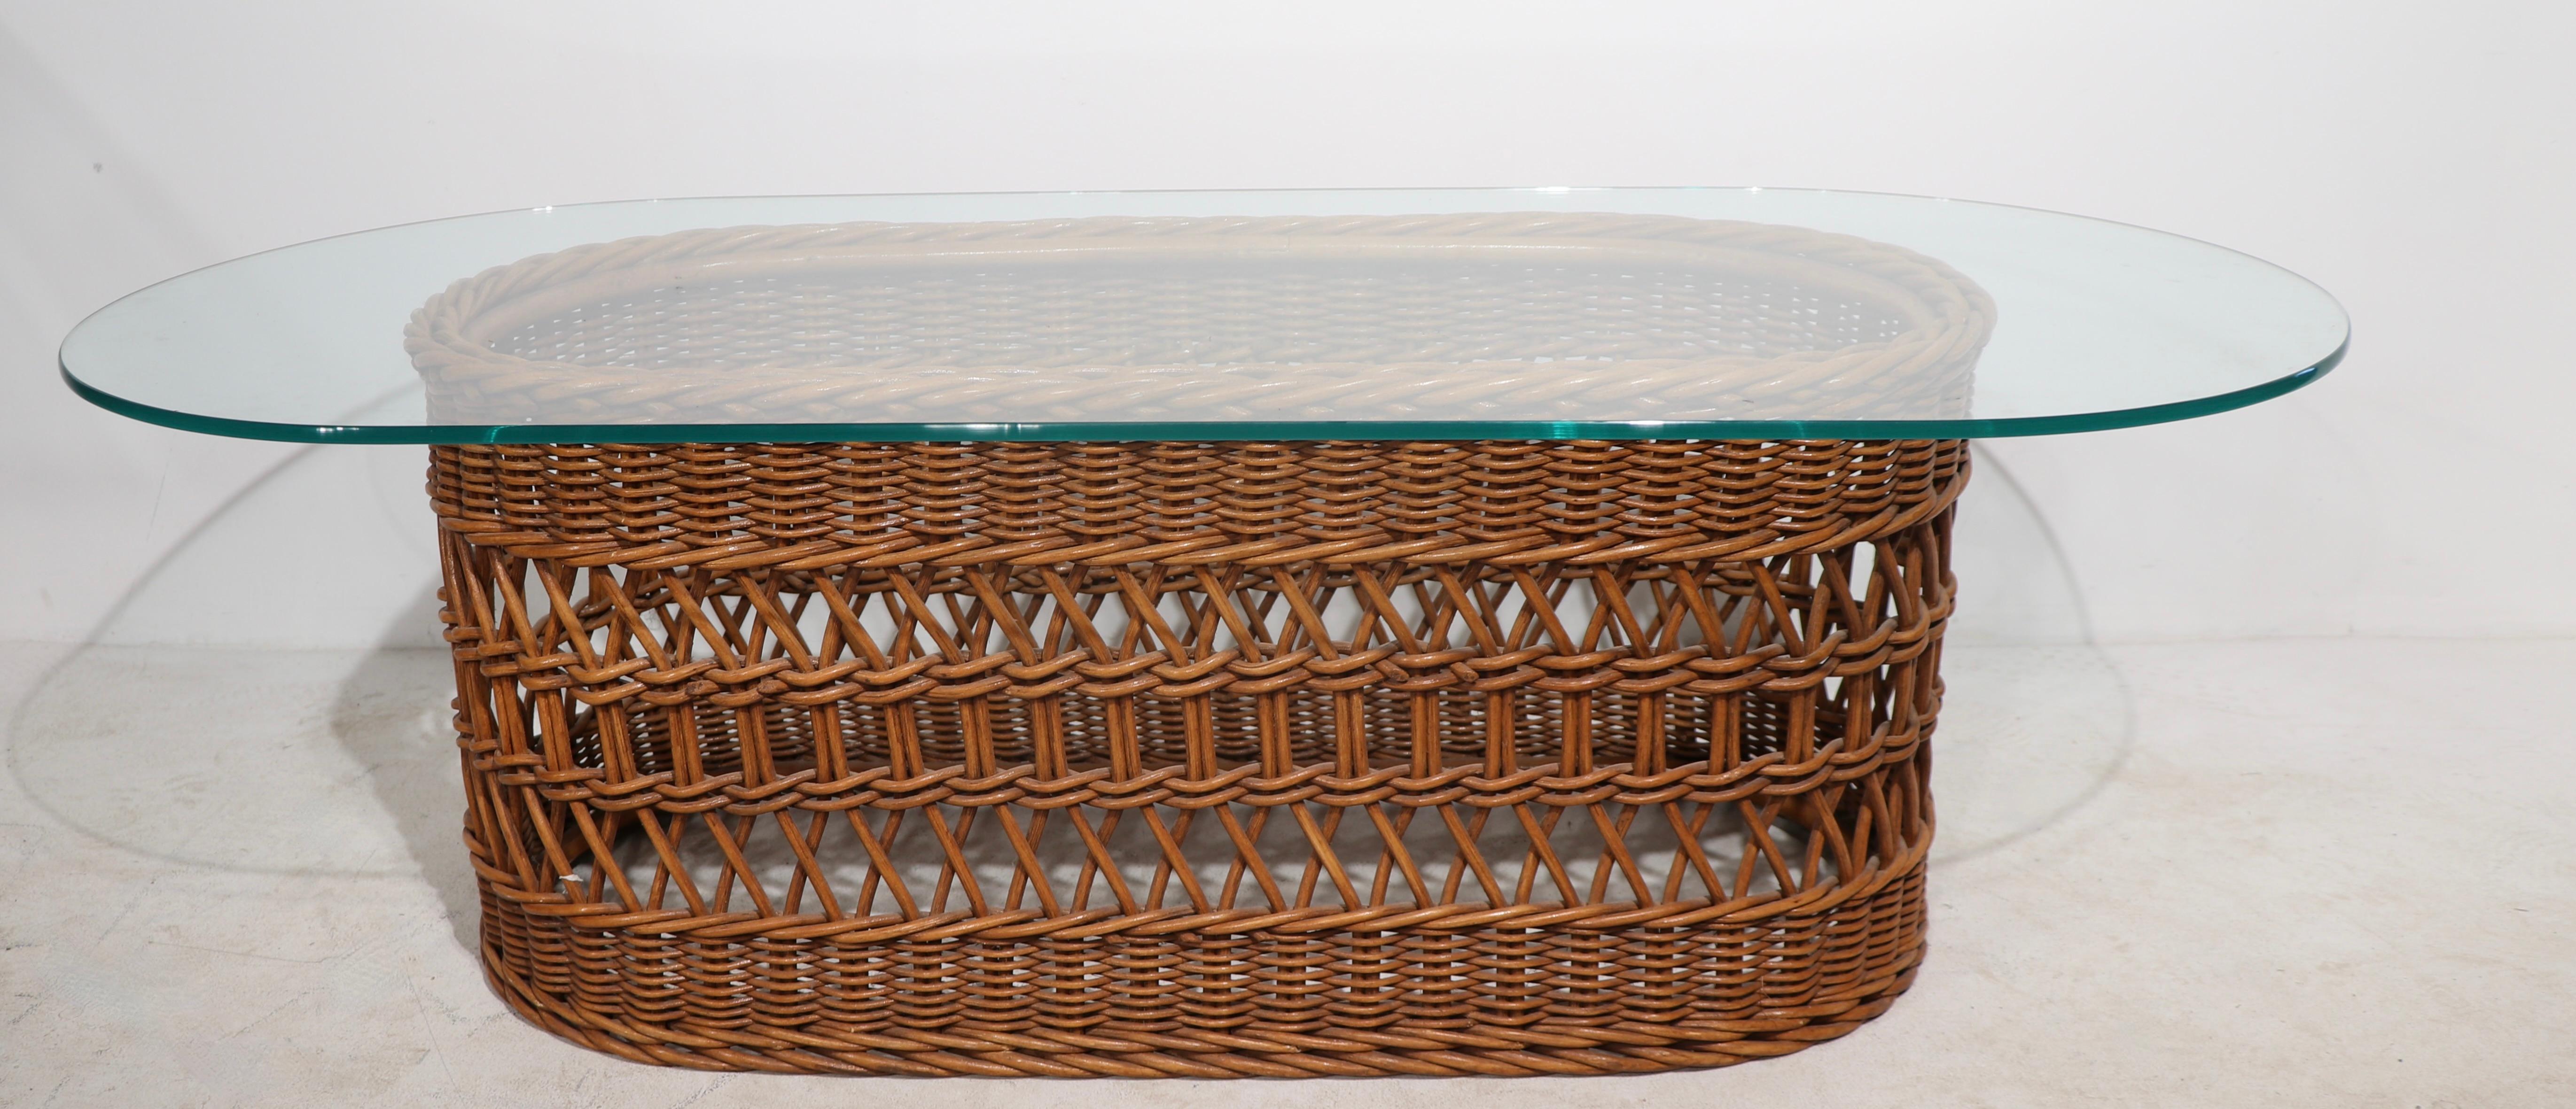 Chic woven wicker and plate glass coffee table in very fine, original condition, clean and ready to use. The oval glass top ( 54 W x 24 D in. ) rests on an oval wicker base ( 37.5 W x 17 D in. ).